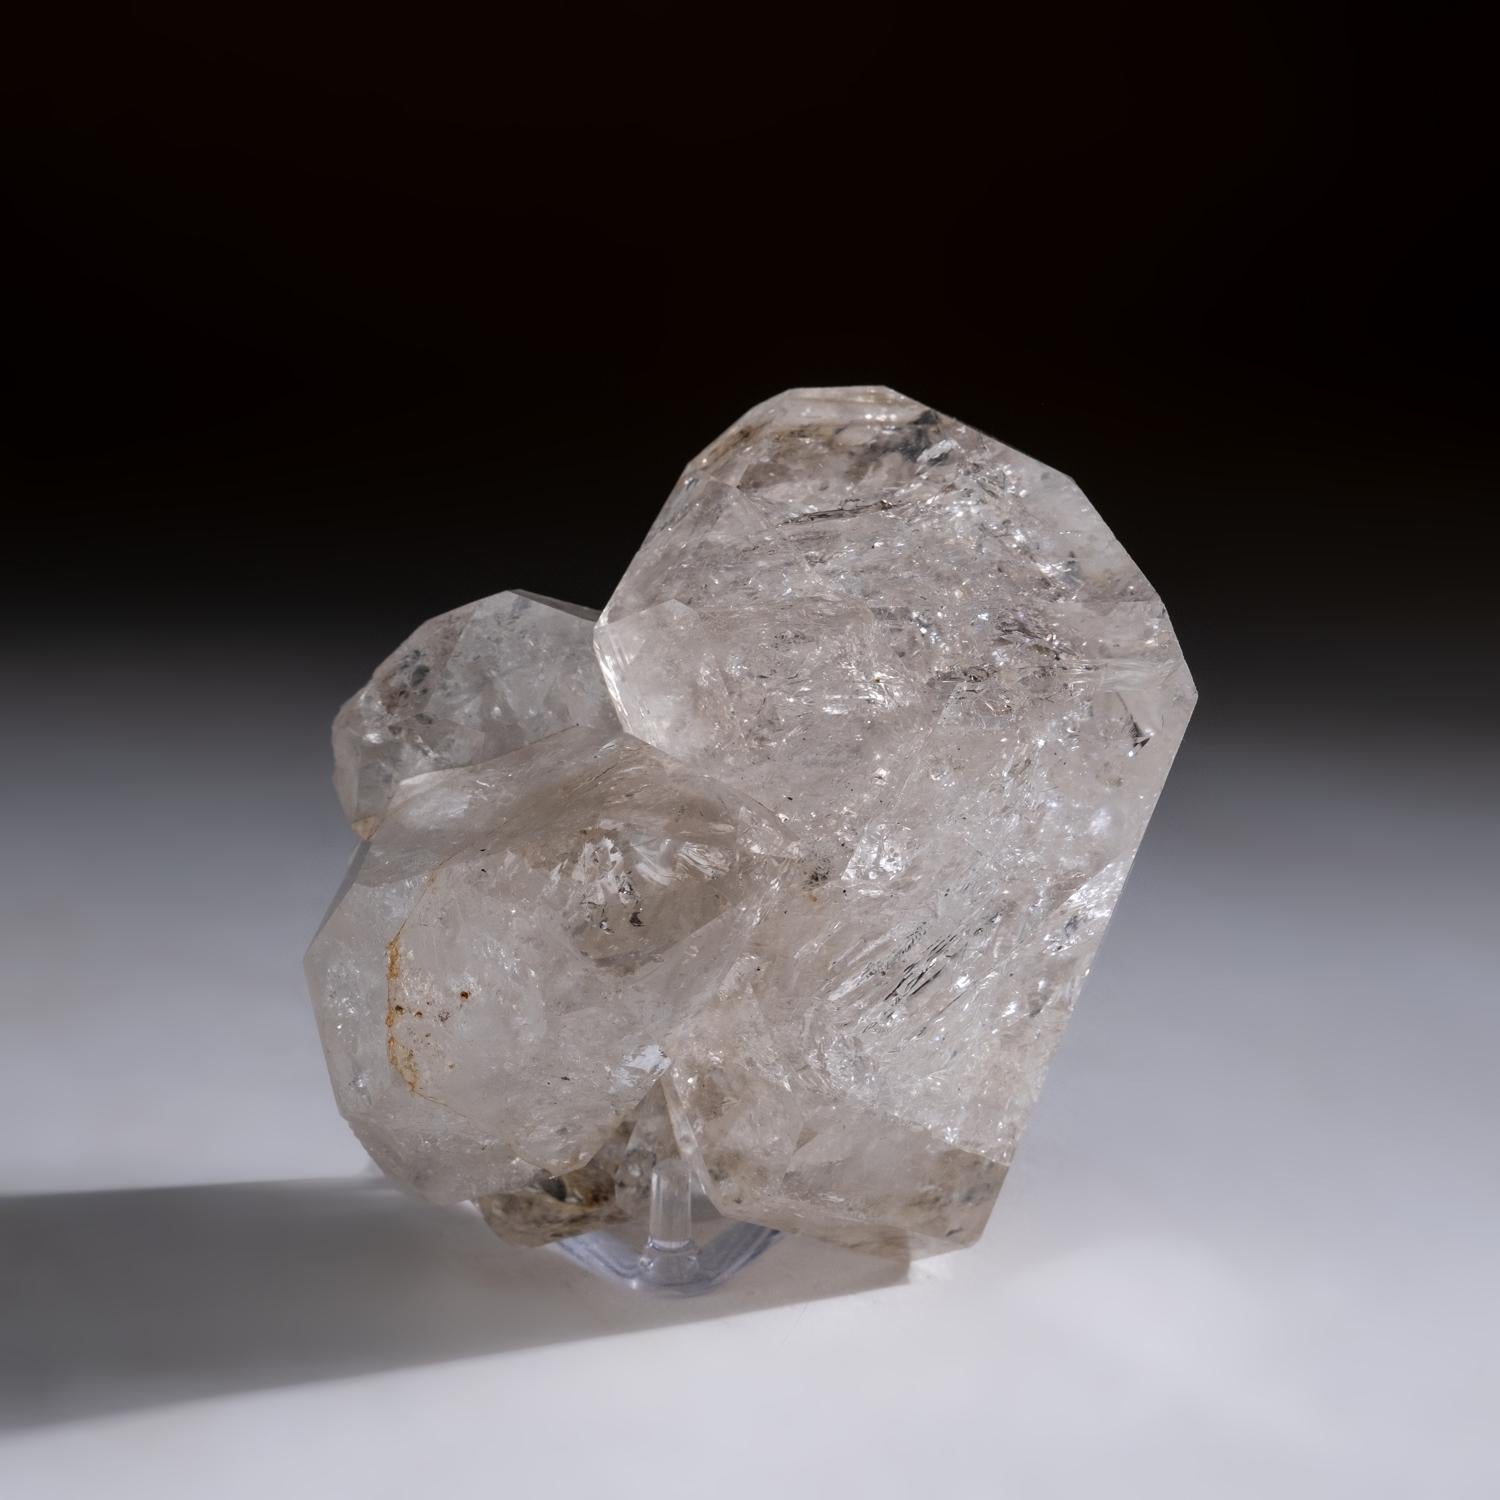 Doubly-terminated, stacked cluster of Herkimer Quartz crystals from Herkimer County, New York. This aesthetic specimen, translucent to transparent 3d diamond shaped clusters, is in pristine condition. This piece has great transparency with minor